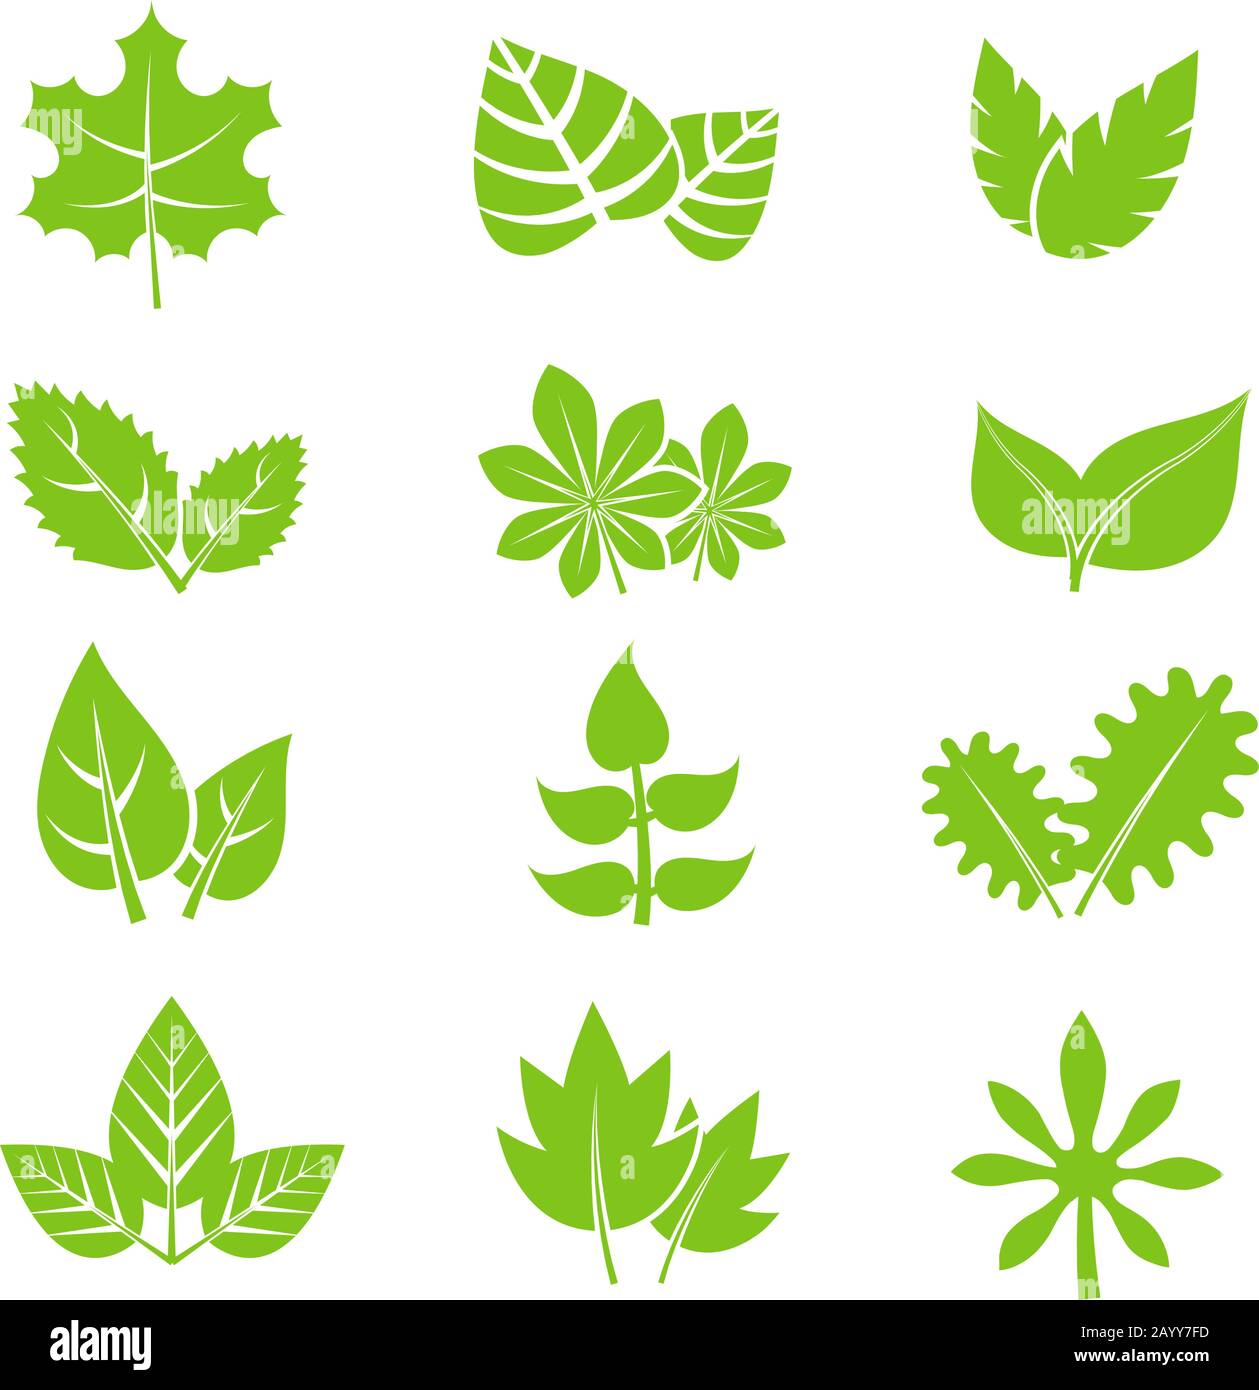 Green leaves vector icons set. Natural eco organic elements illustration Stock Vector